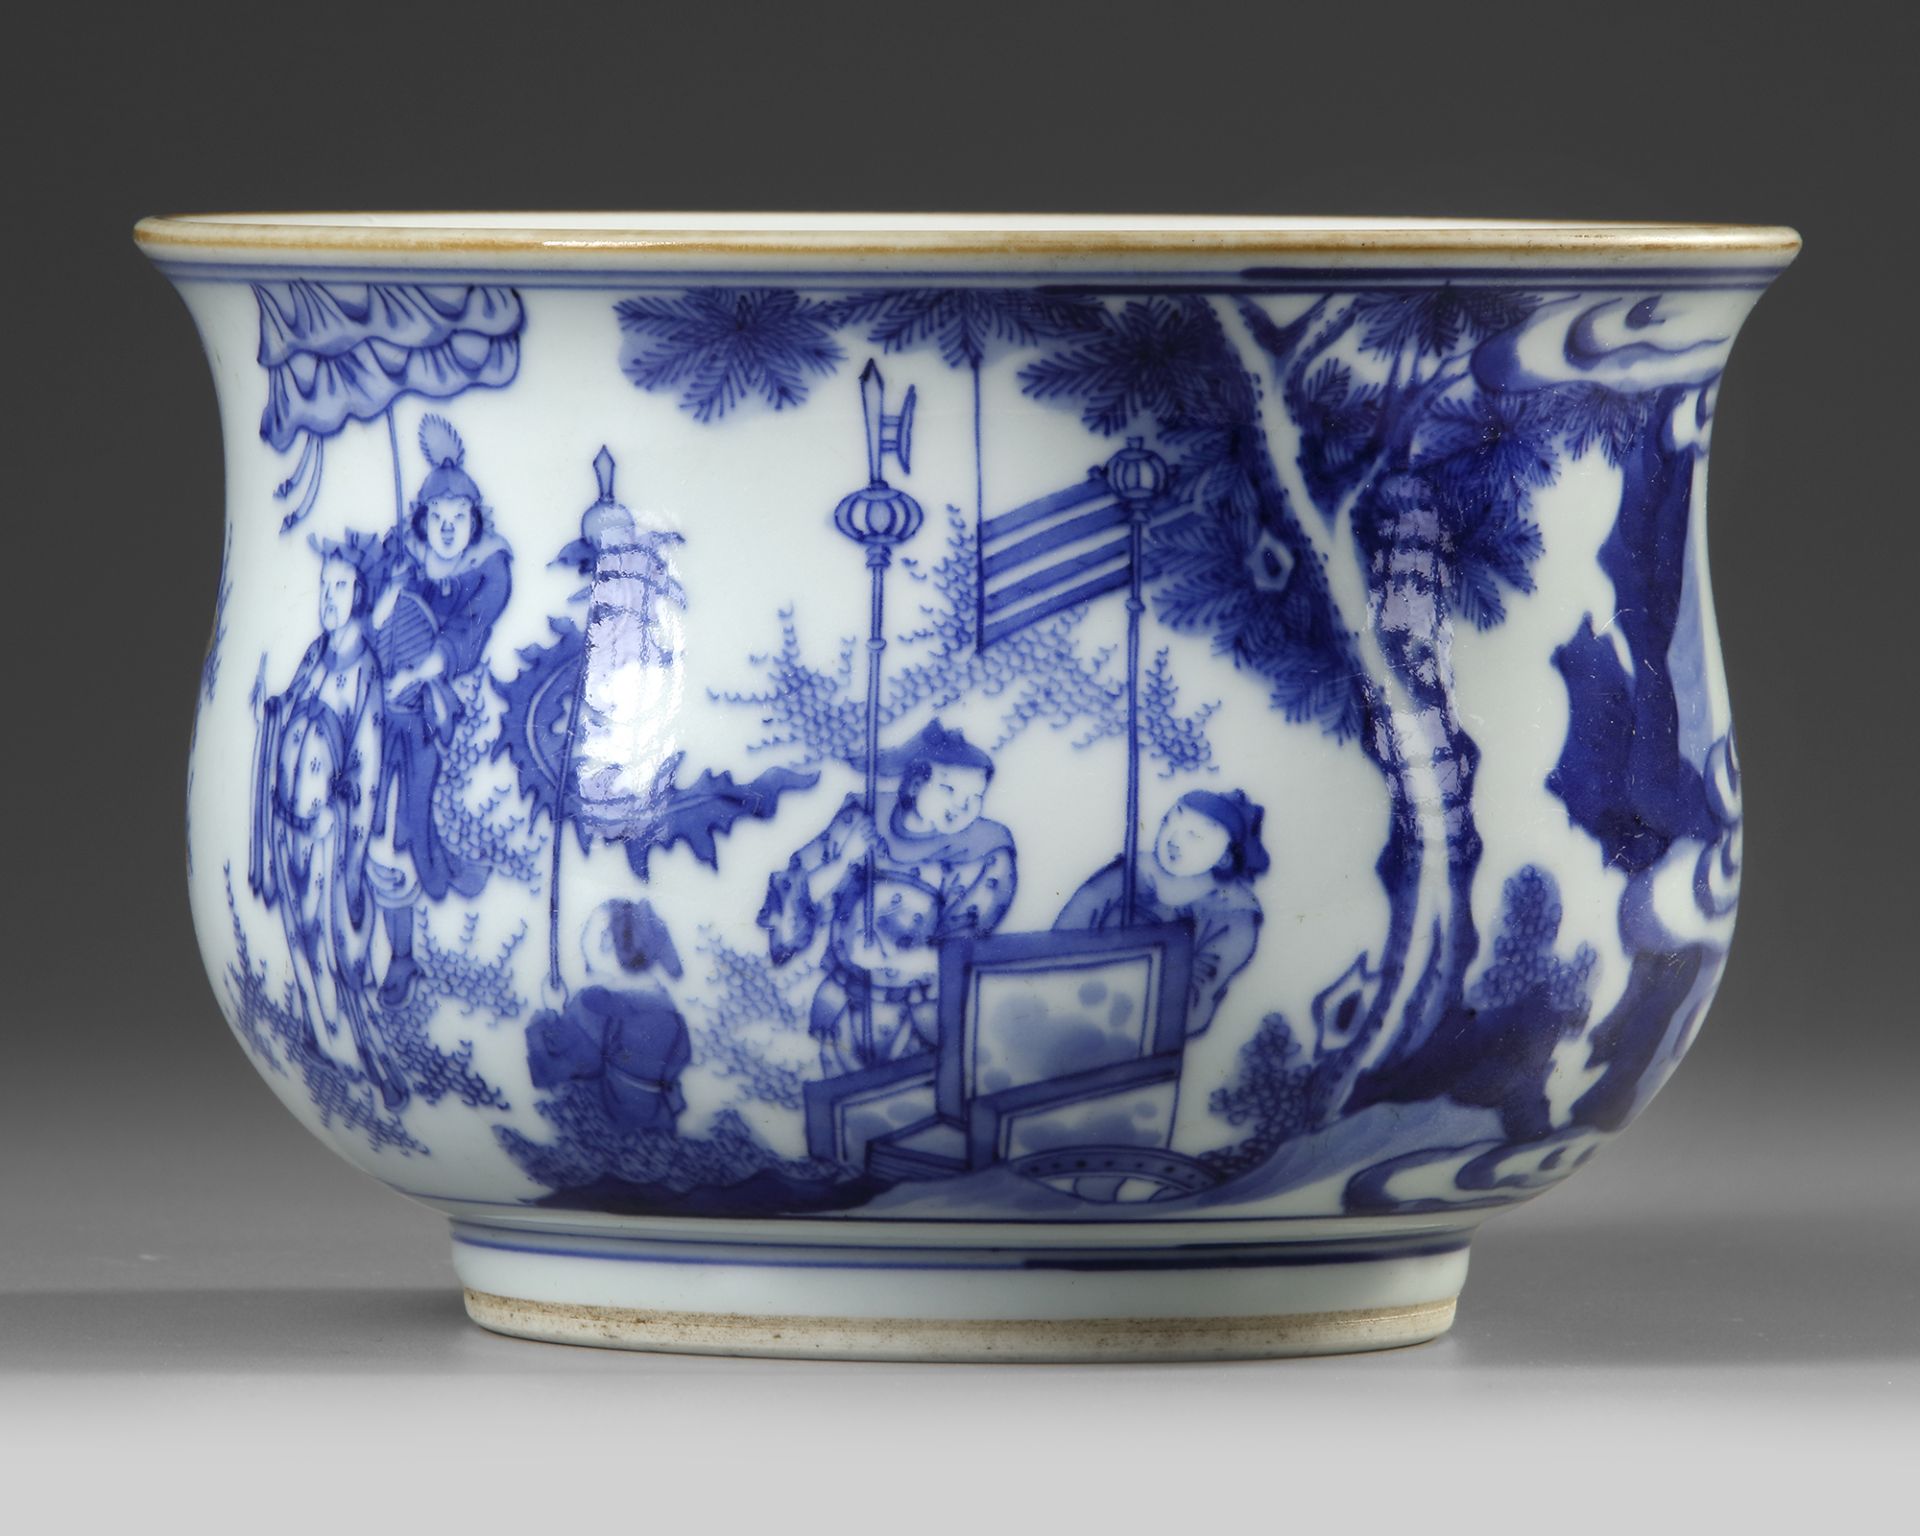 A CHINESE BLUE AND WHITE BOWL, QING DYNASTY (1662-1912)